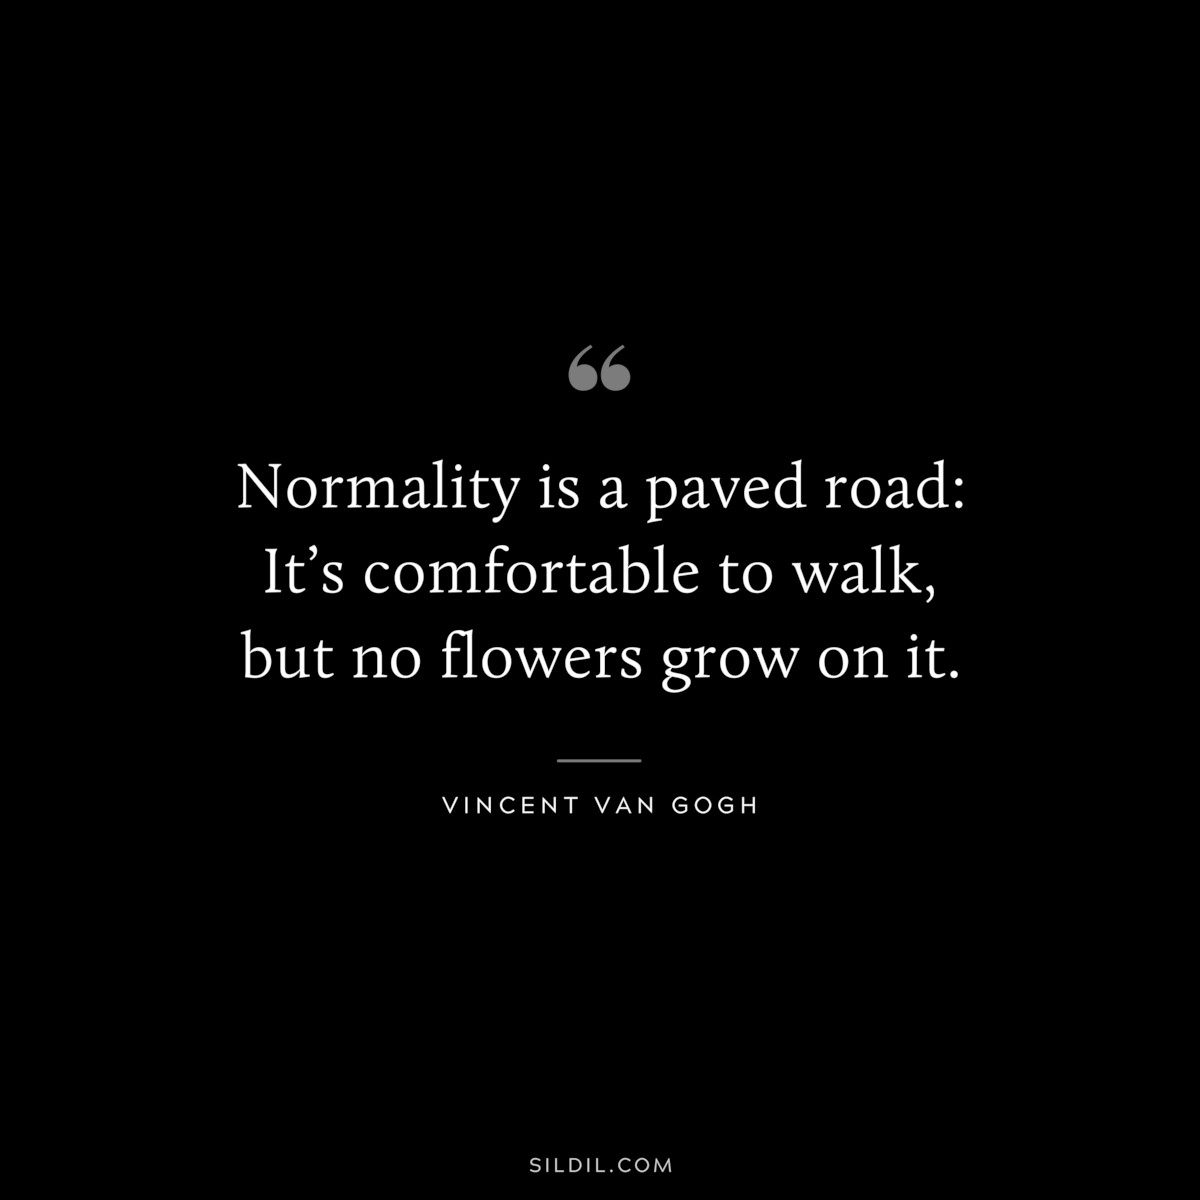 Normality is a paved road: It’s comfortable to walk,﻿ but no flowers grow on it. ― Vincent van Gogh